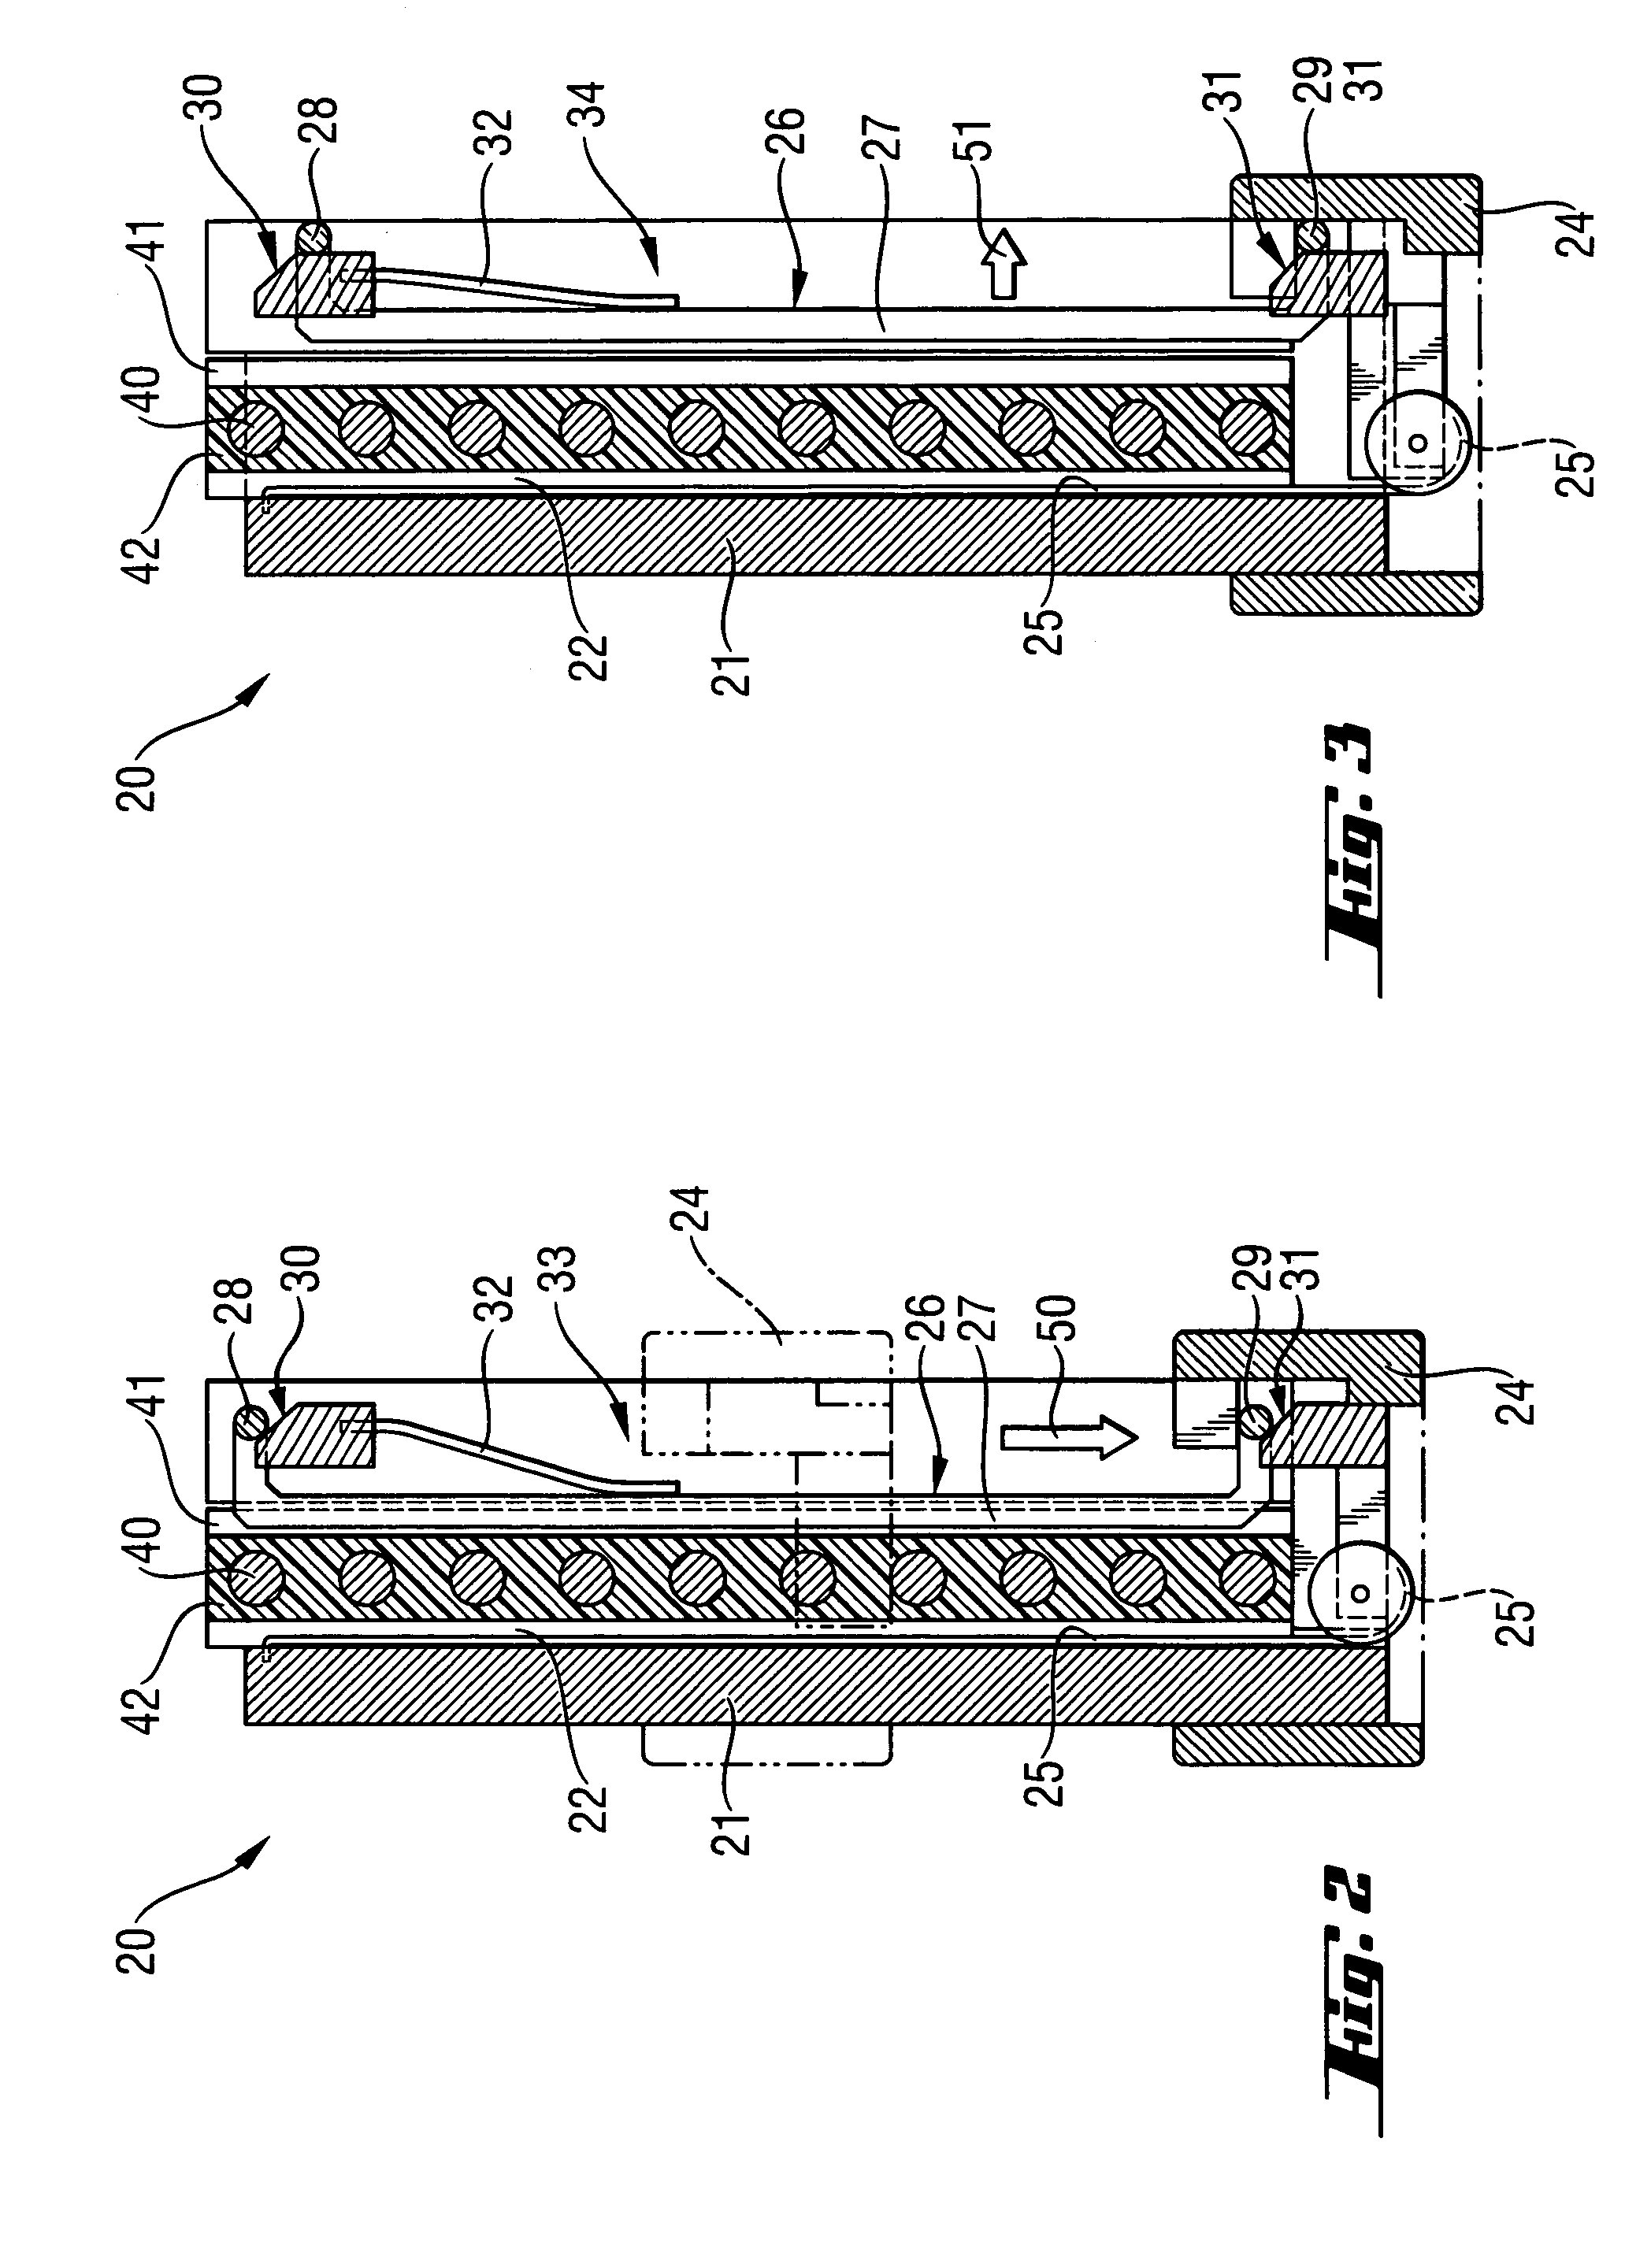 Magazine with fastening elements for a setting tool and a setting tool with the magazine with fastening elements